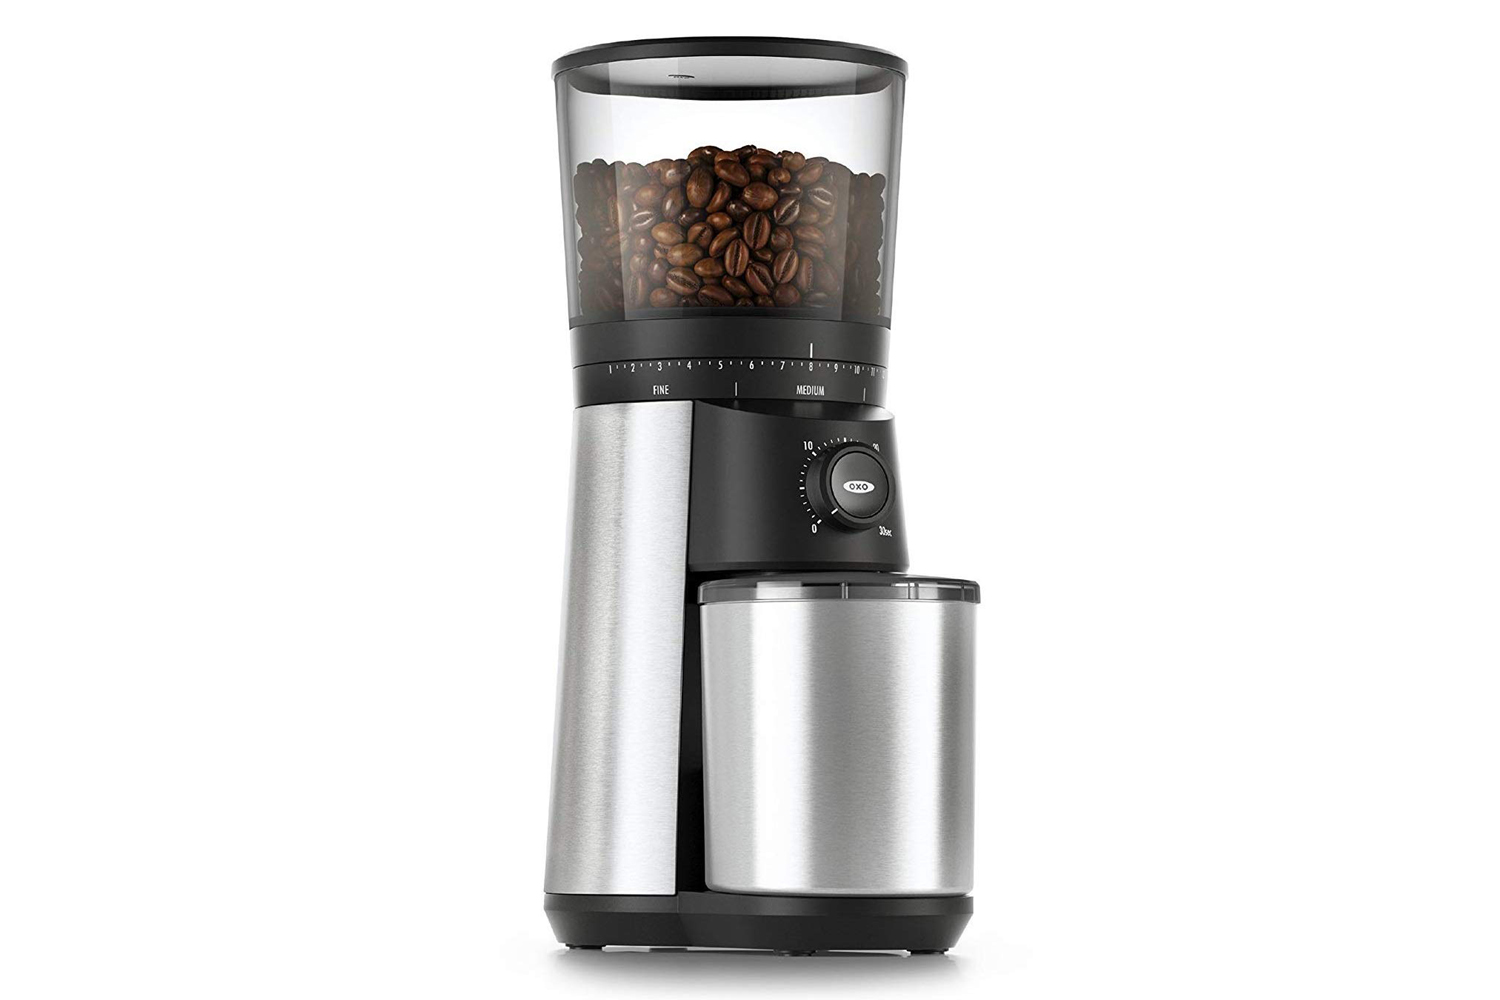 Burr Grinder vs Blade Grinder: What's The Difference? – The Roasterie